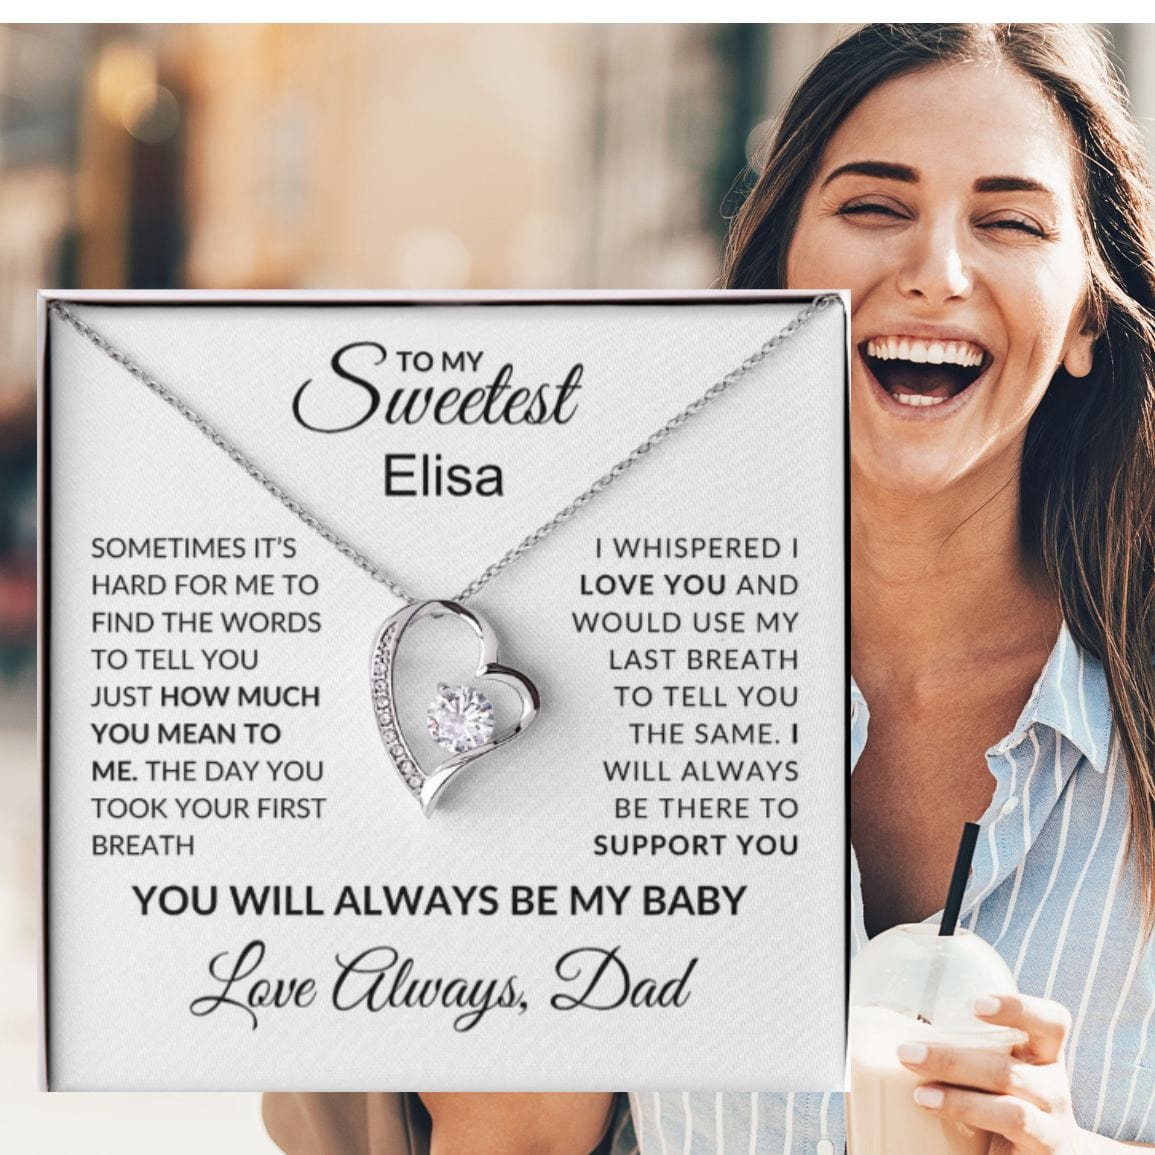 To My Daughter - PERSONALIZED Forever Love Necklace - 14k white gold finish